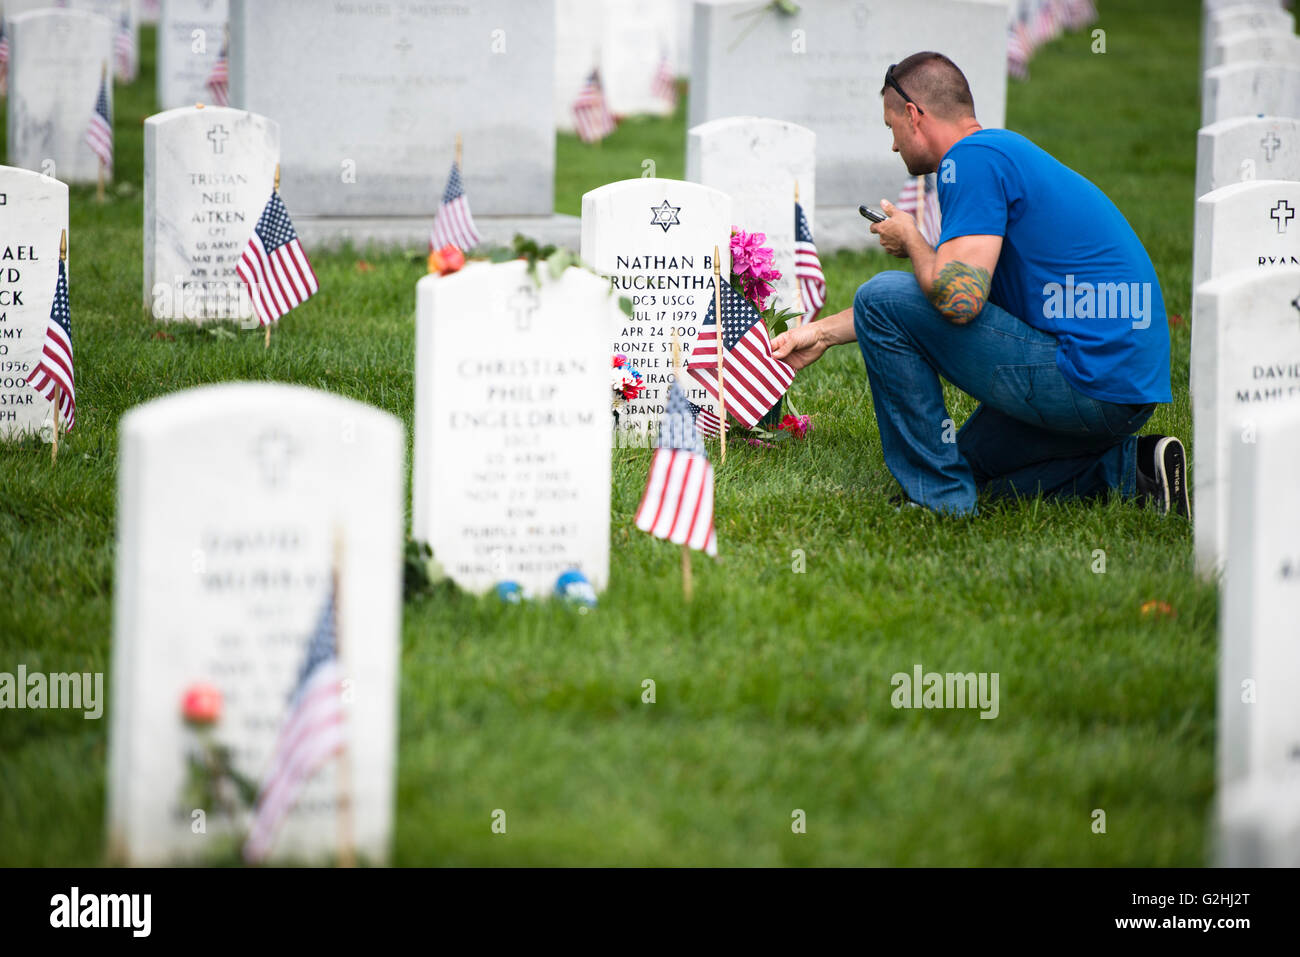 Arlington National Cemetery, Virginia, USA. 30th May, 2016. U.S. Coast Guard Petty Officer First Class Sam Allen visits the grave of U.S. Coast Guard Petty Officer 3rd Class Nathan B. Bruckenthal on Memorial Day at Arlington National Cemetery May 30, 2016 in Arlington, Virginia. Bruckenthal was the first member of the Coast Guard killed in action since the Vietnam War. Credit:  Planetpix/Alamy Live News Stock Photo